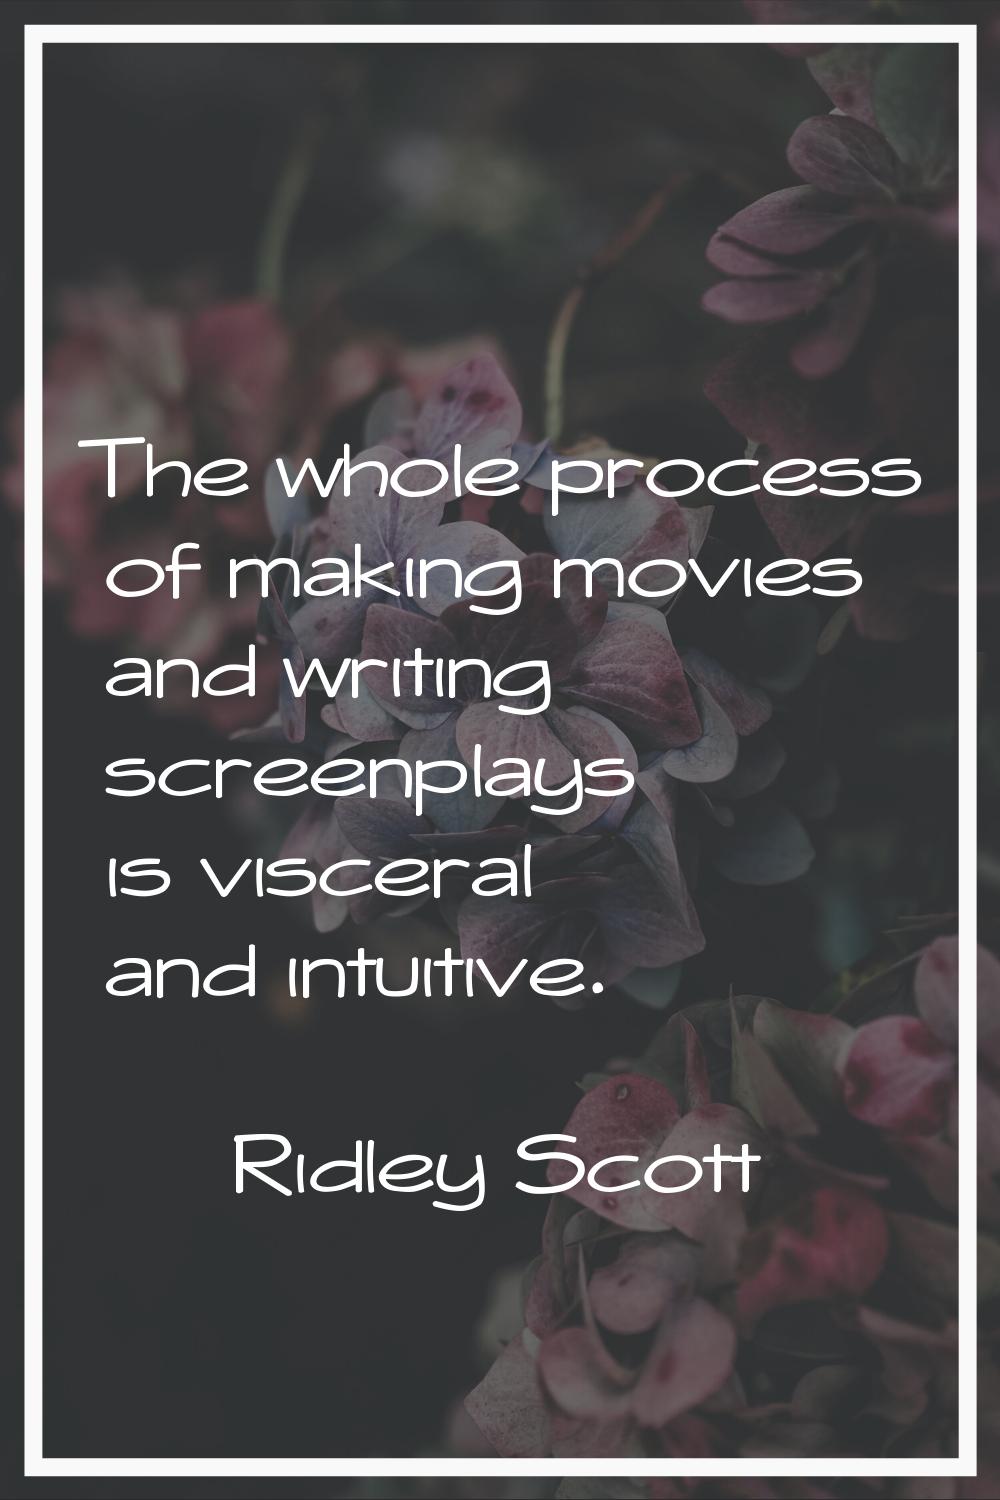 The whole process of making movies and writing screenplays is visceral and intuitive.